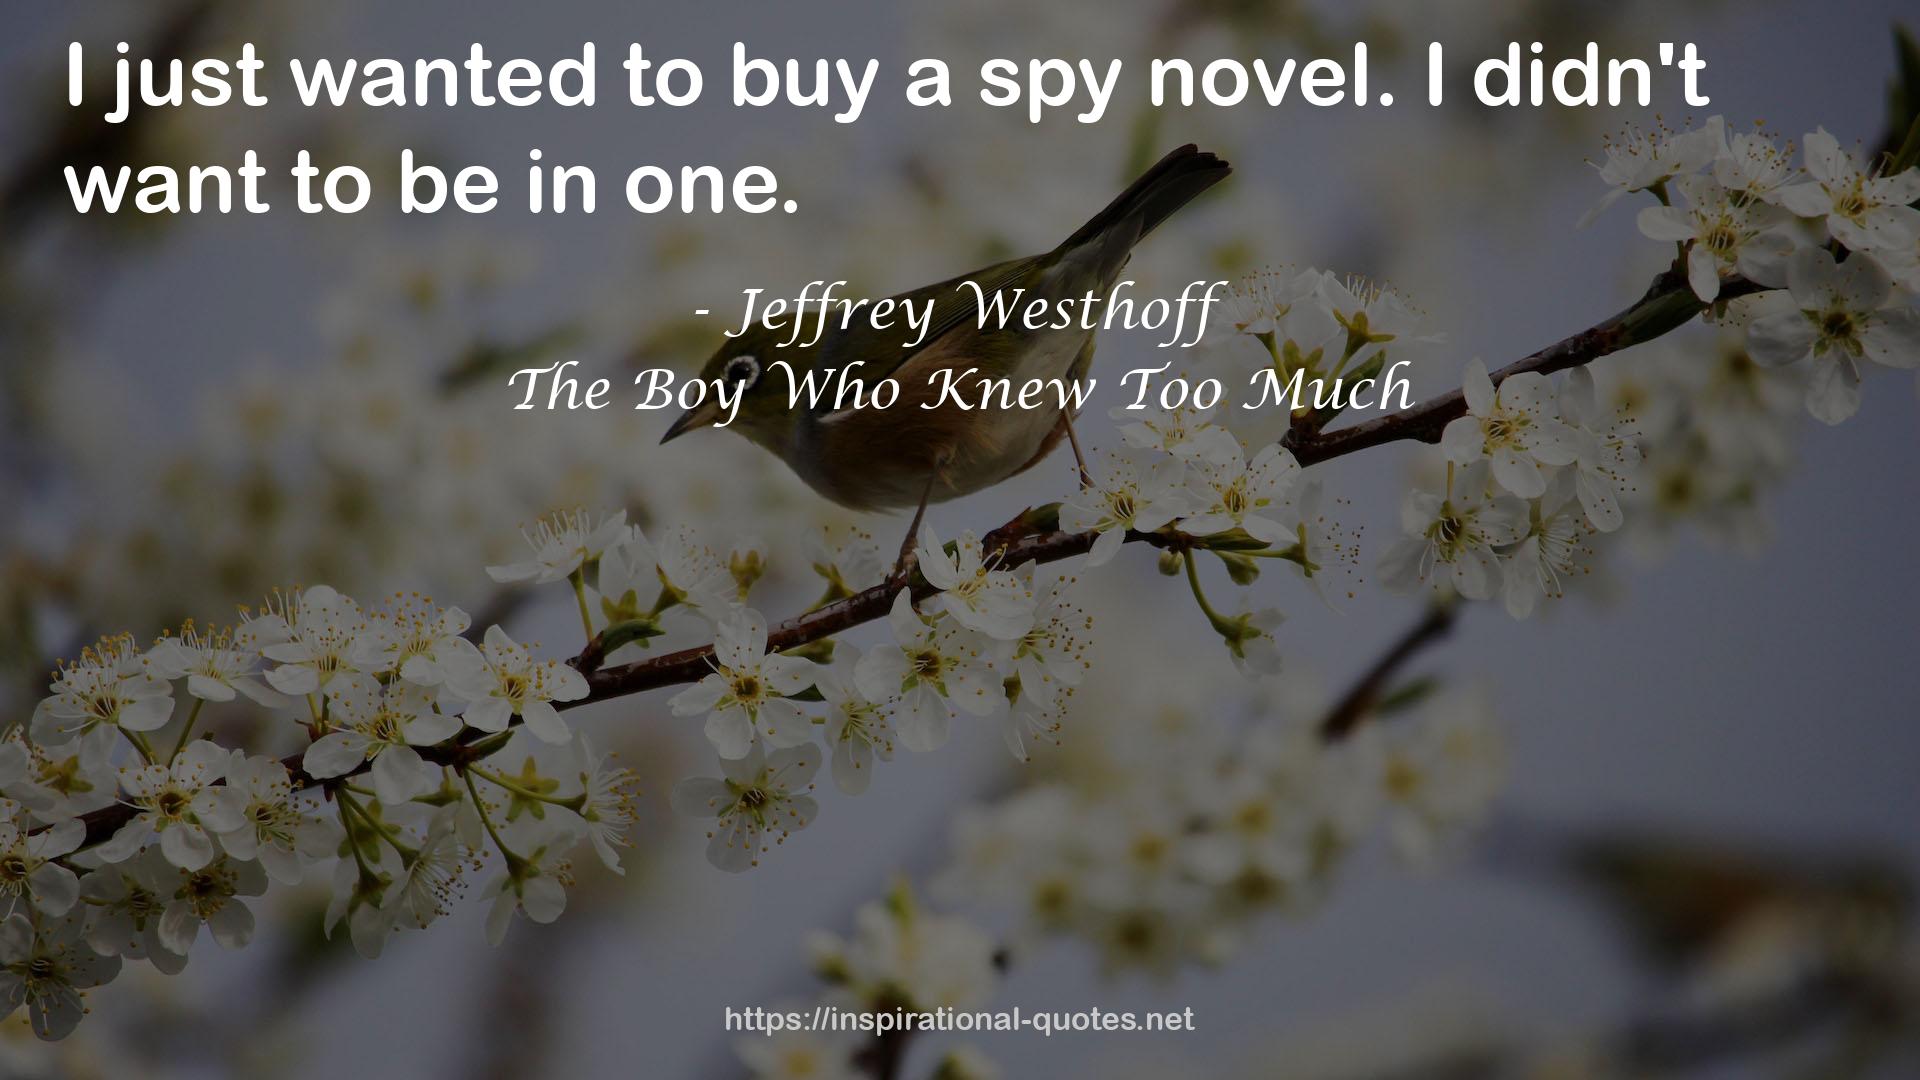 The Boy Who Knew Too Much QUOTES